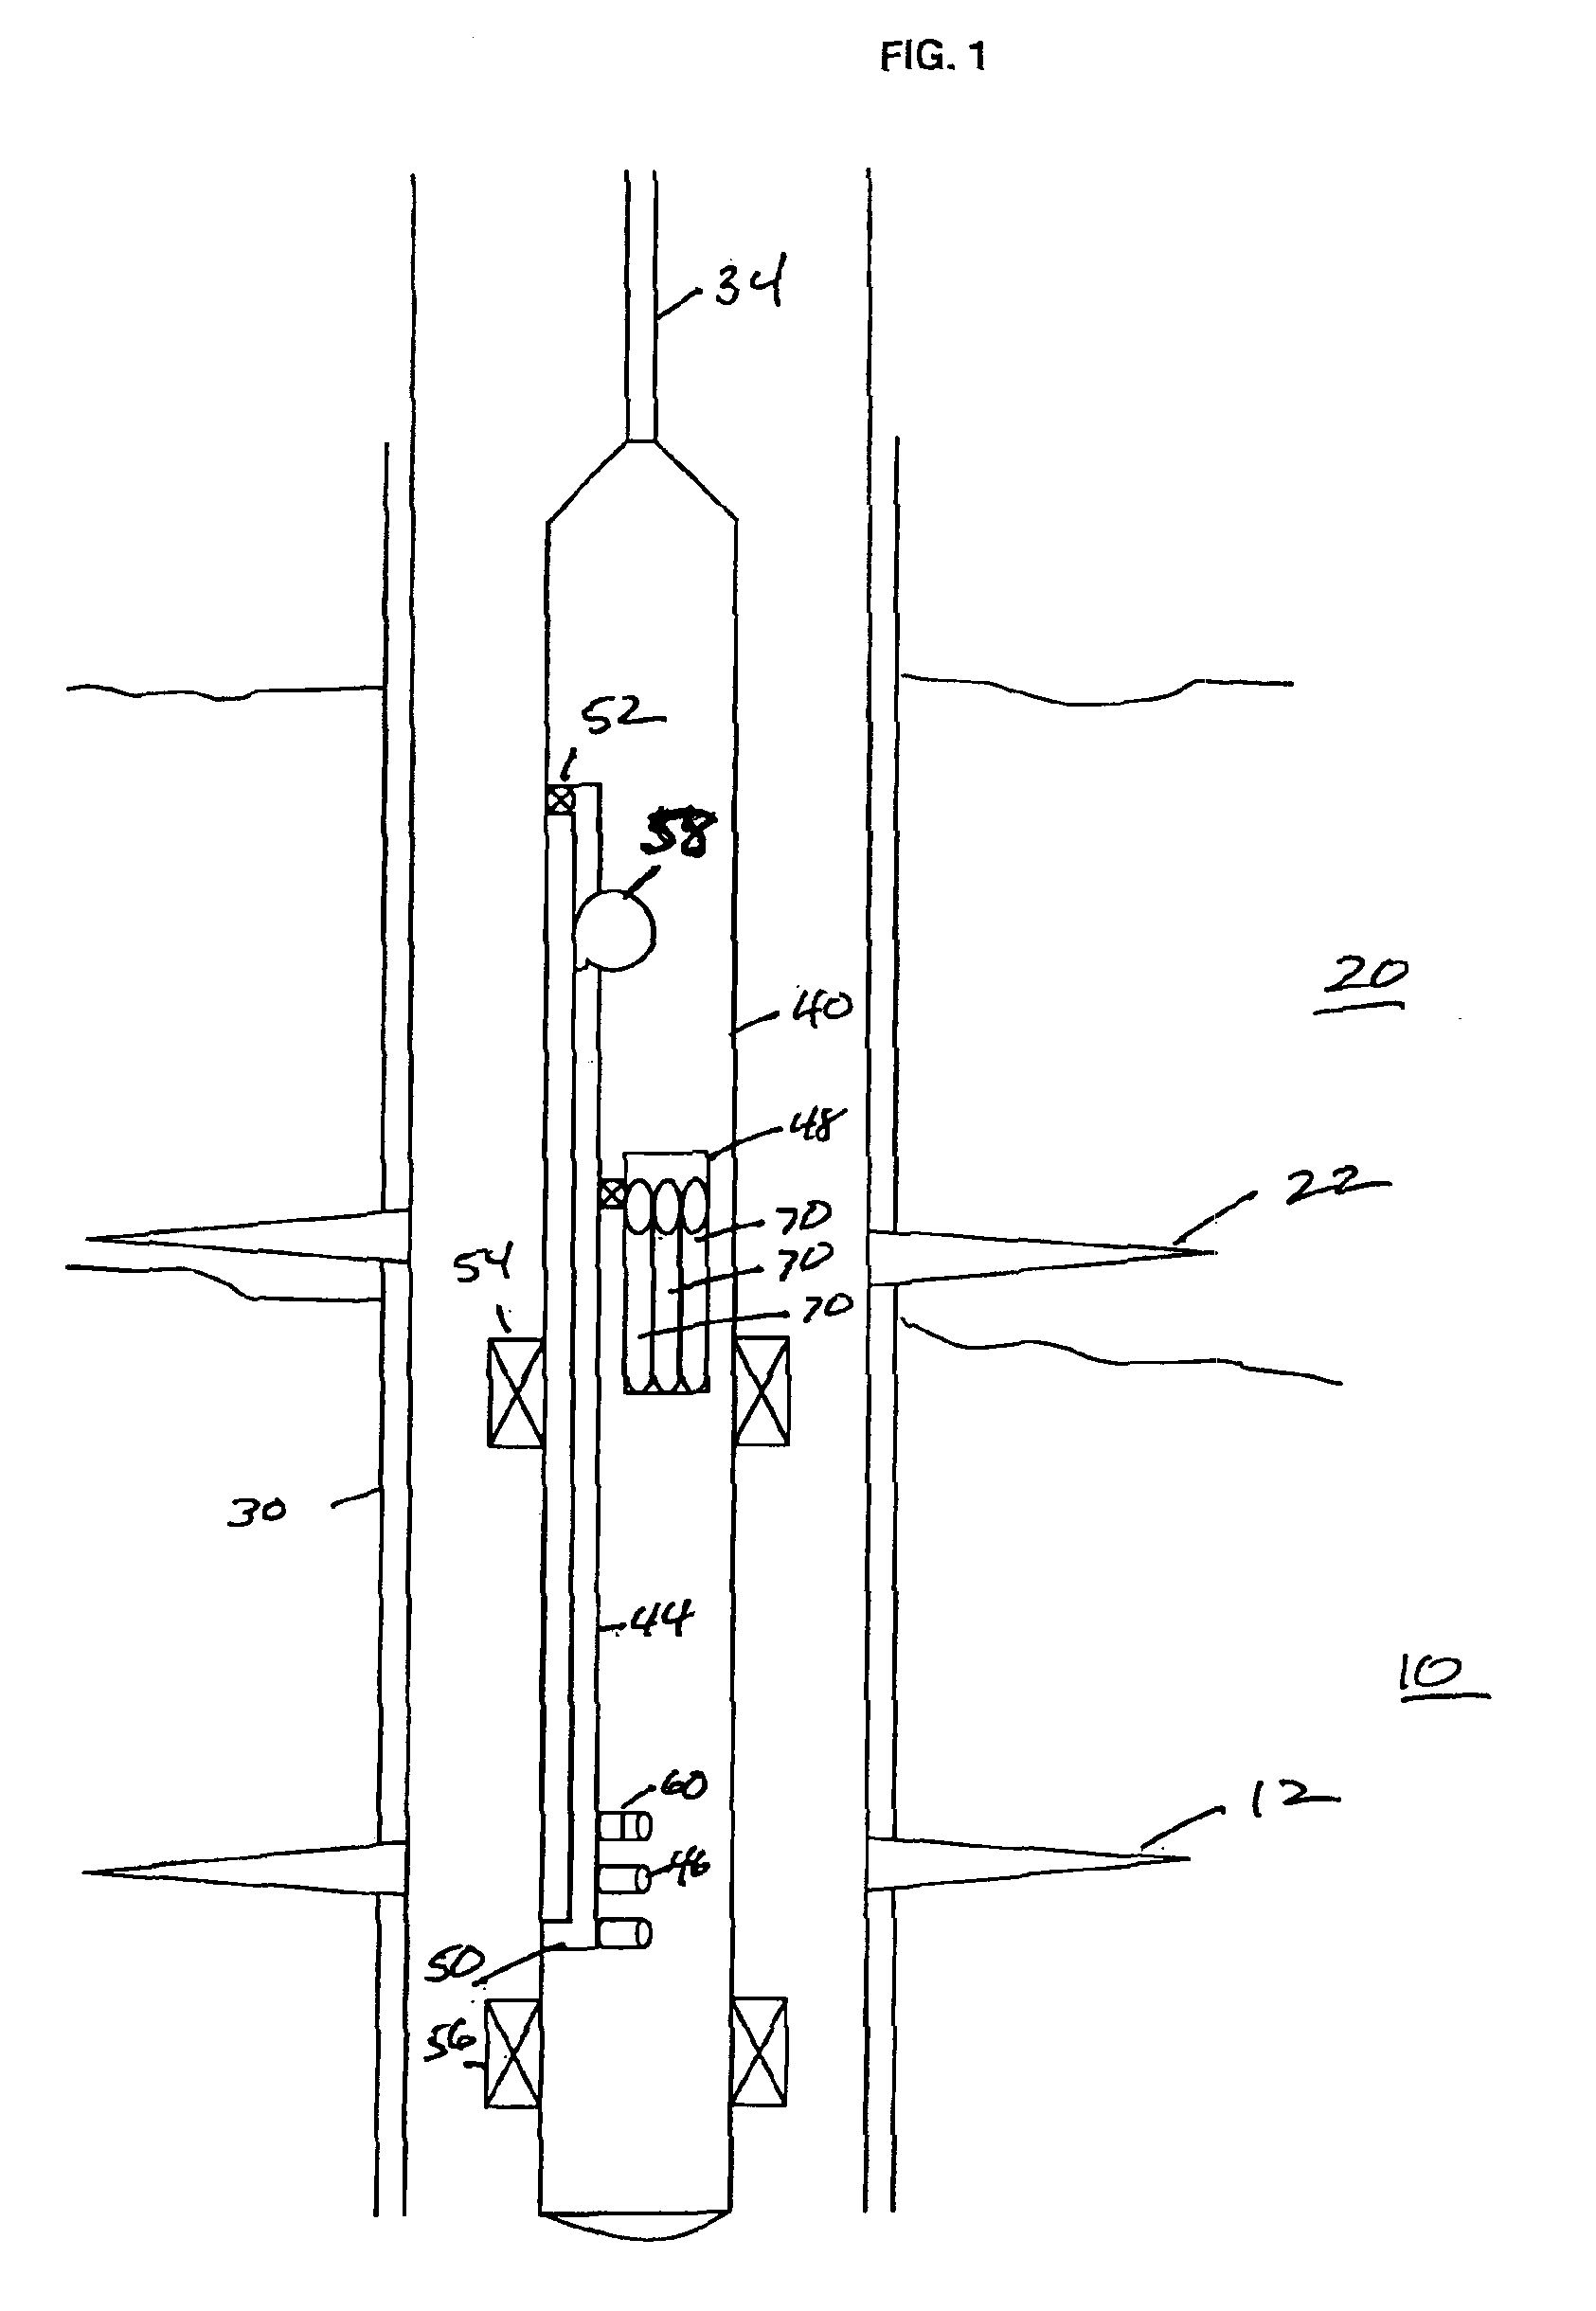 Retrieving a sample of formation fluid in as cased hole